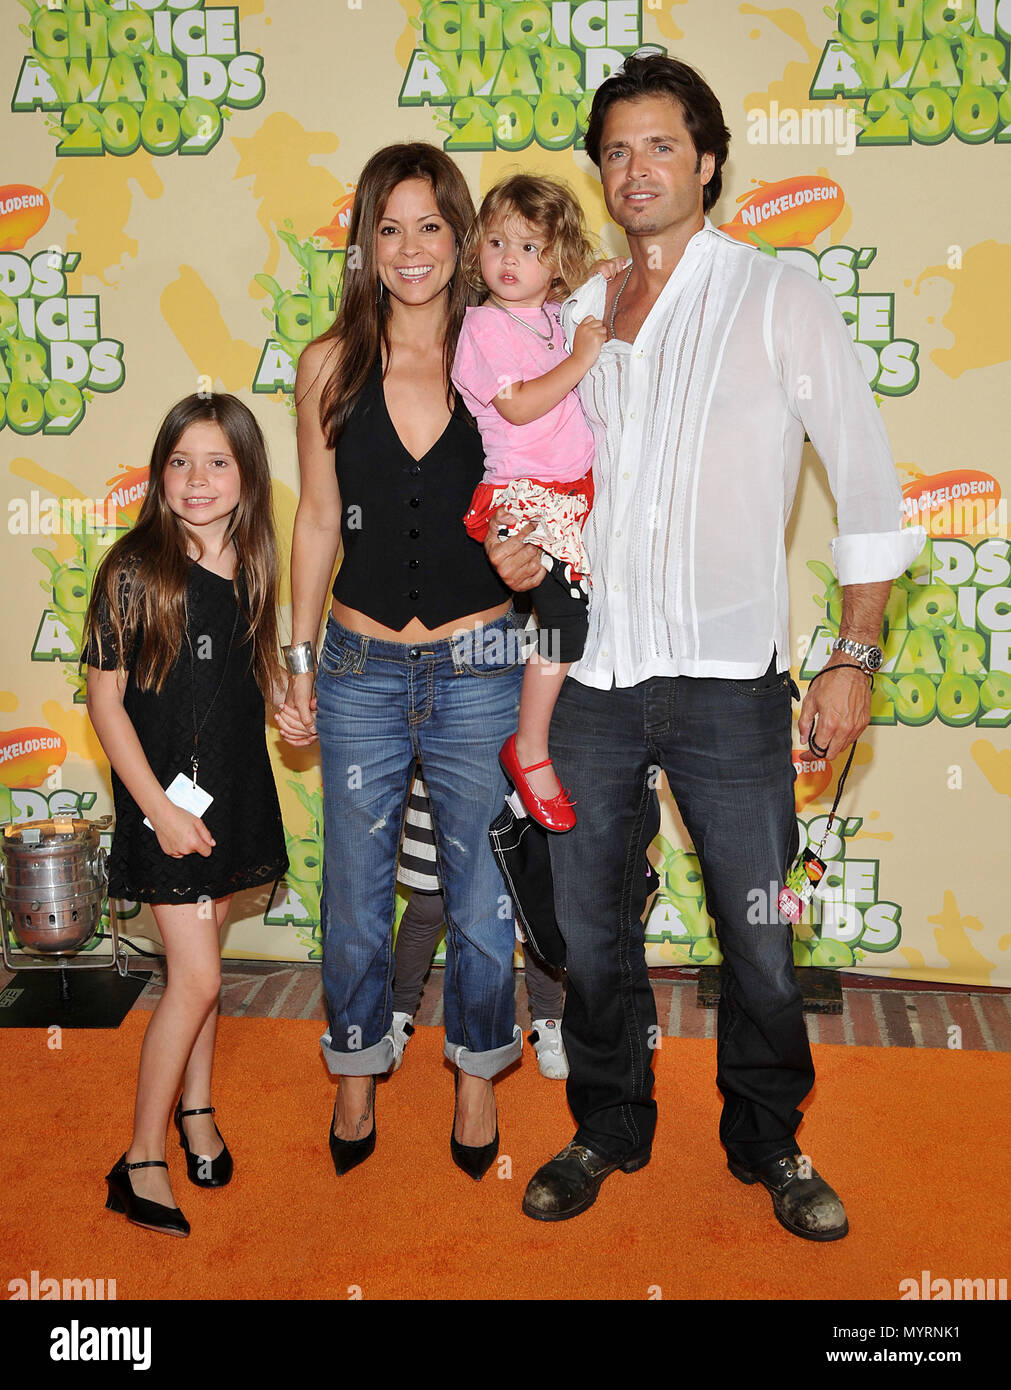 Brooke Burke and David Charvet and kids  - NickelOdeon 22th Kids Choice Awards at the UCLA's Pauley Pavilion In Westwood, Los Angeles.15 BurkeBrooke CharvetDavid 15  Event in Hollywood Life - California, Red Carpet Event, USA, Film Industry, Celebrities, Photography, Bestof, Arts Culture and Entertainment, Celebrities fashion, Best of, Hollywood Life, Event in Hollywood Life - California, Red Carpet and backstage, Music celebrities, Topix, Couple, family ( husband and wife ) and kids- Children, brothers and sisters inquiry tsuni@Gamma-USA.com, Credit Tsuni / USA, 2006 to 2009 Stock Photo